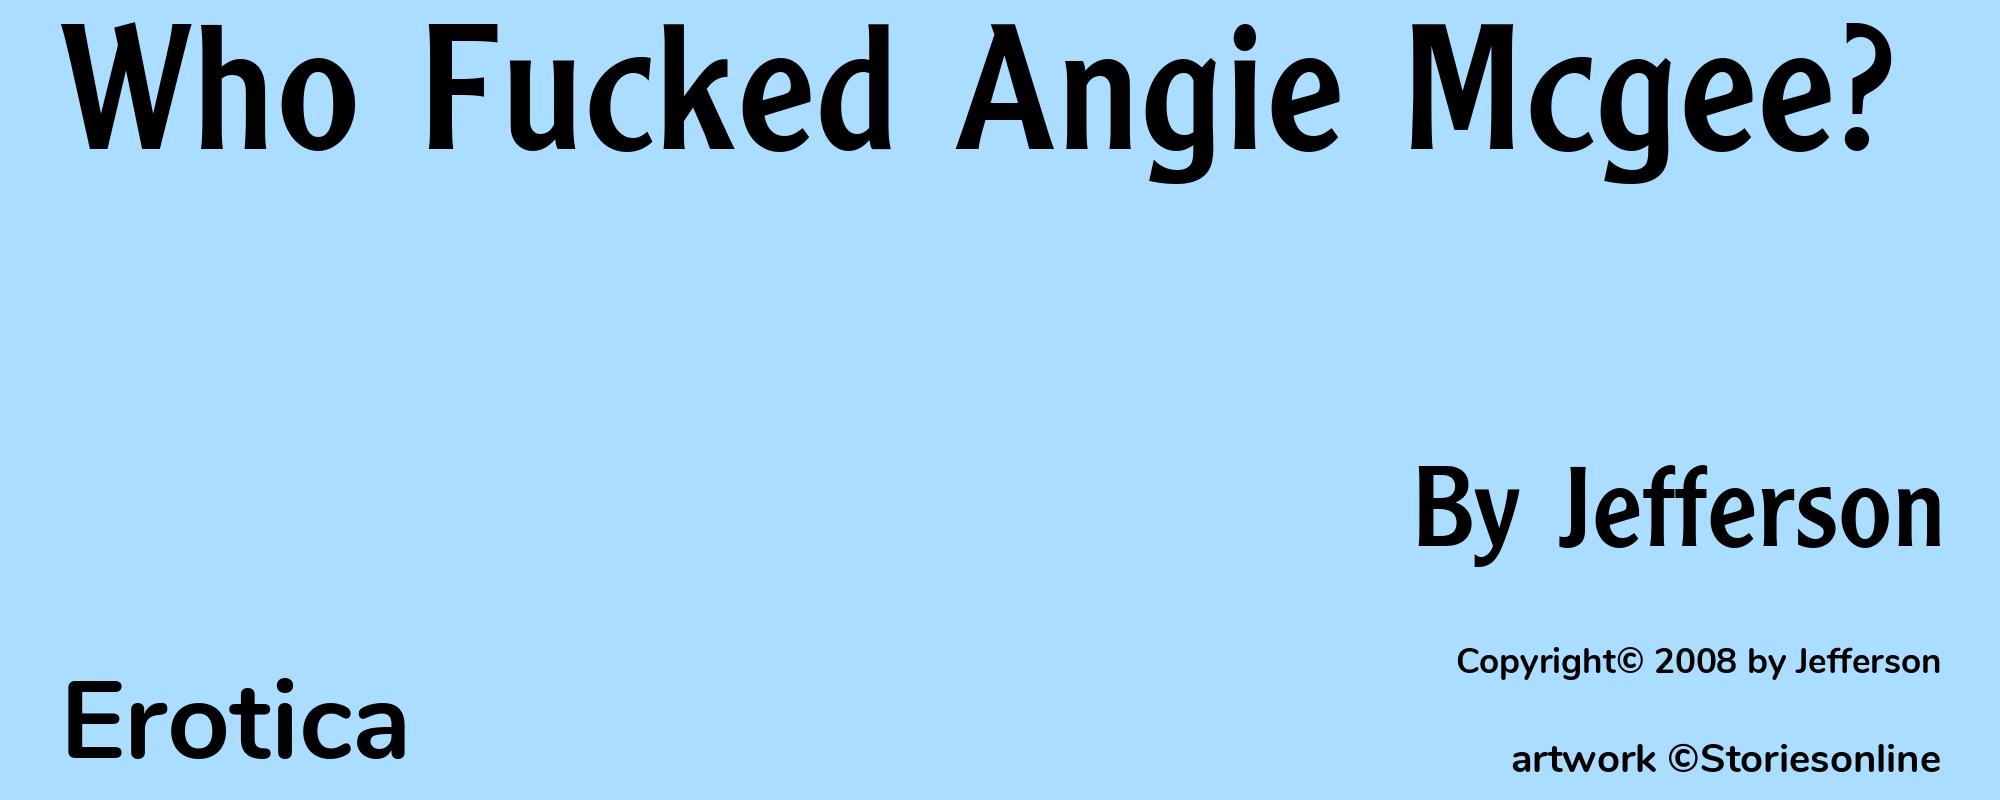 Who Fucked Angie Mcgee? - Cover